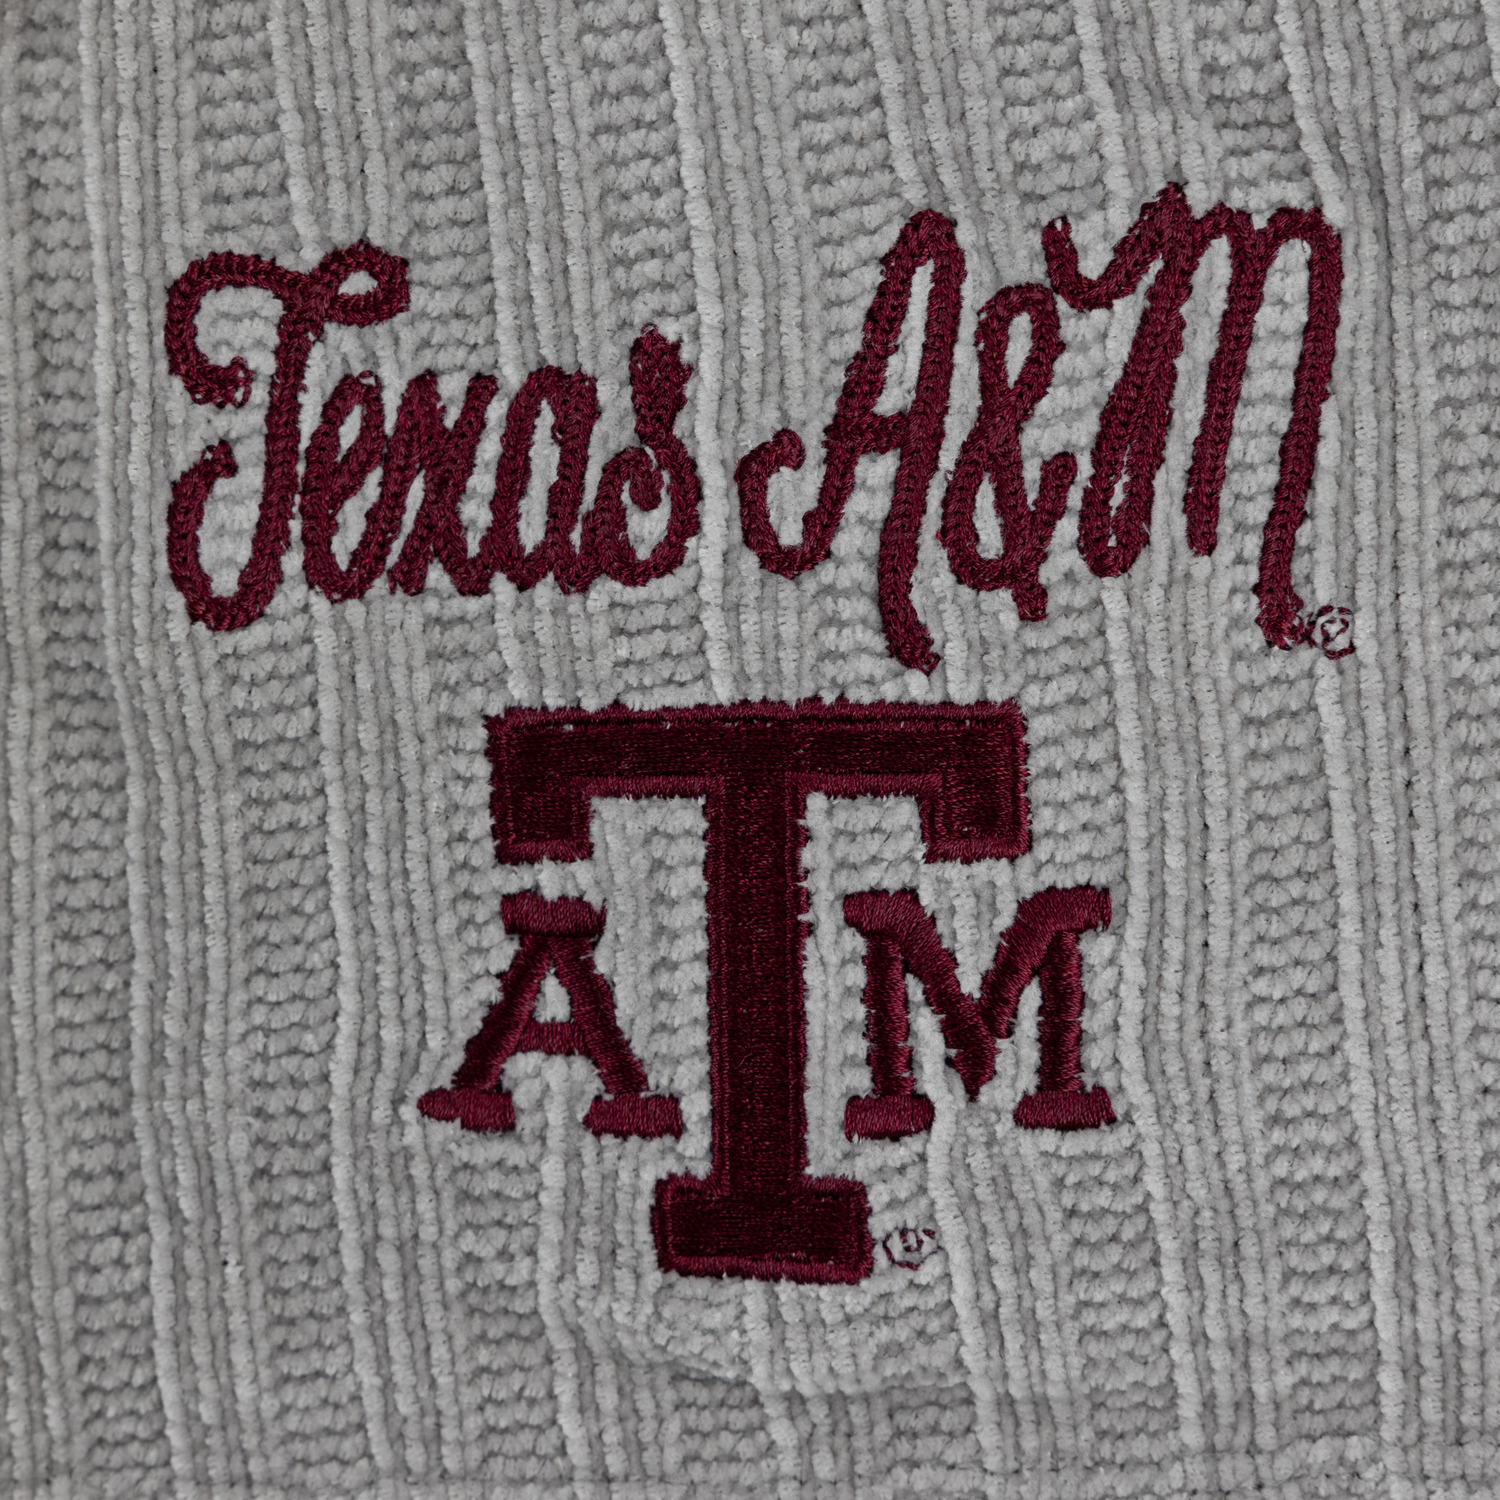 Texas A&M Linger Chenille Shorts